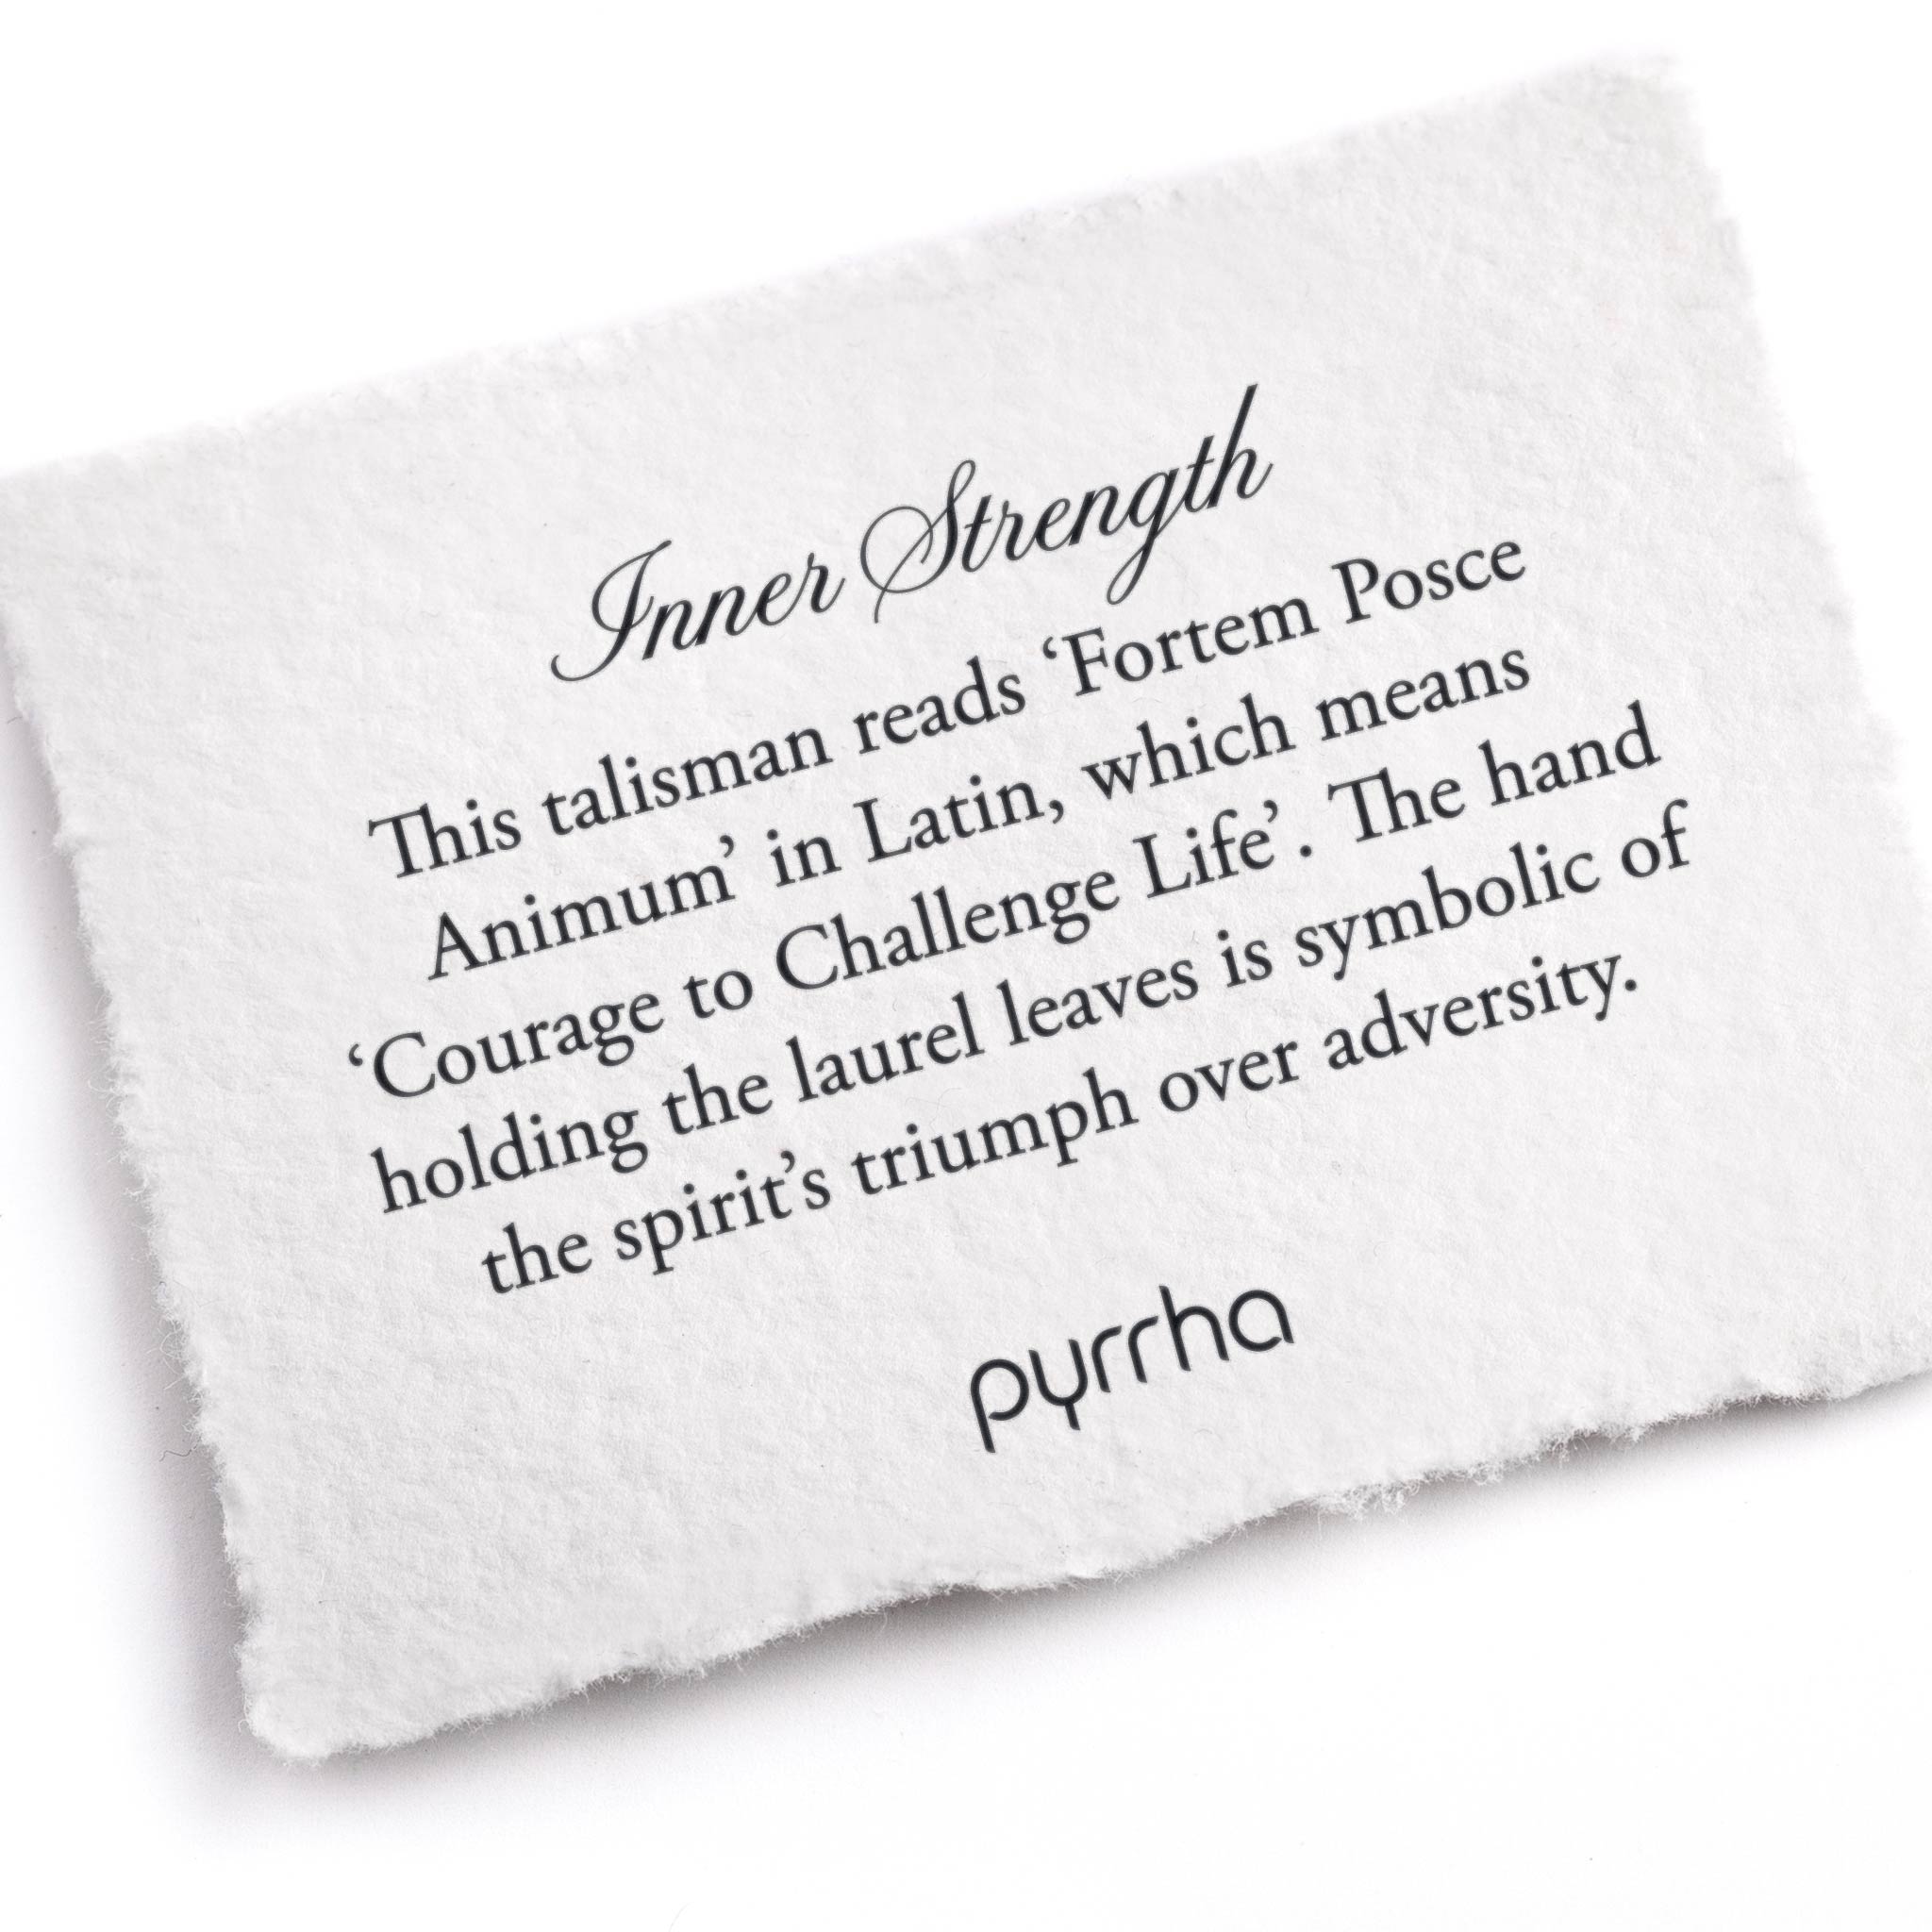 A hand-torn, letterpress printed card describing the meaning for Pyrrha's Inner Strength Talisman Necklace